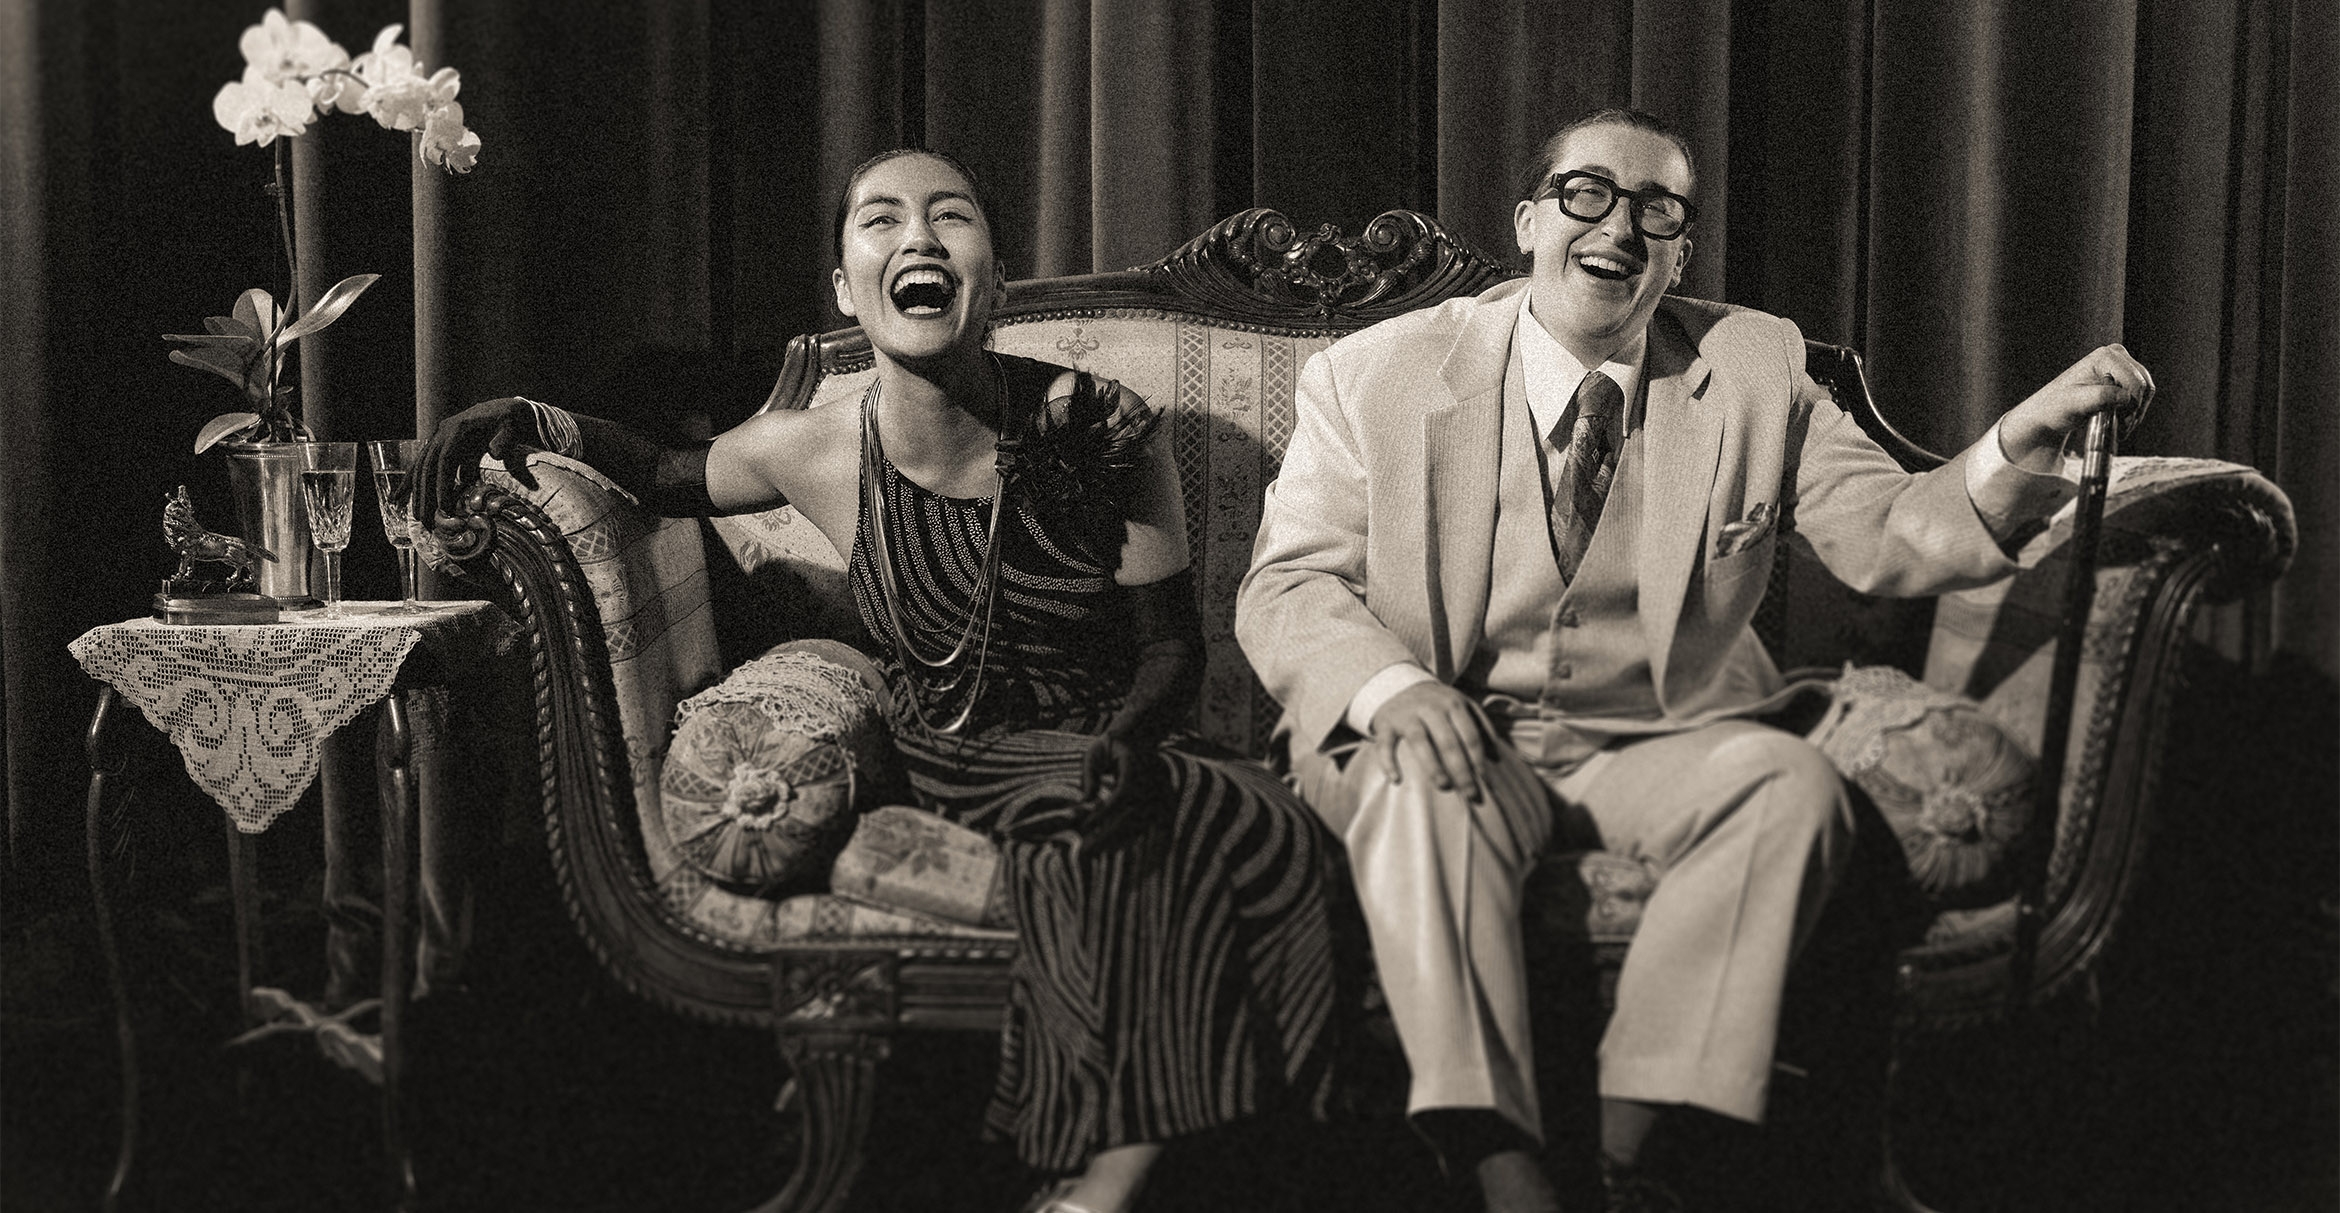 Two actors in 1920s attire sitting on a couch, laughing, in a black and white image